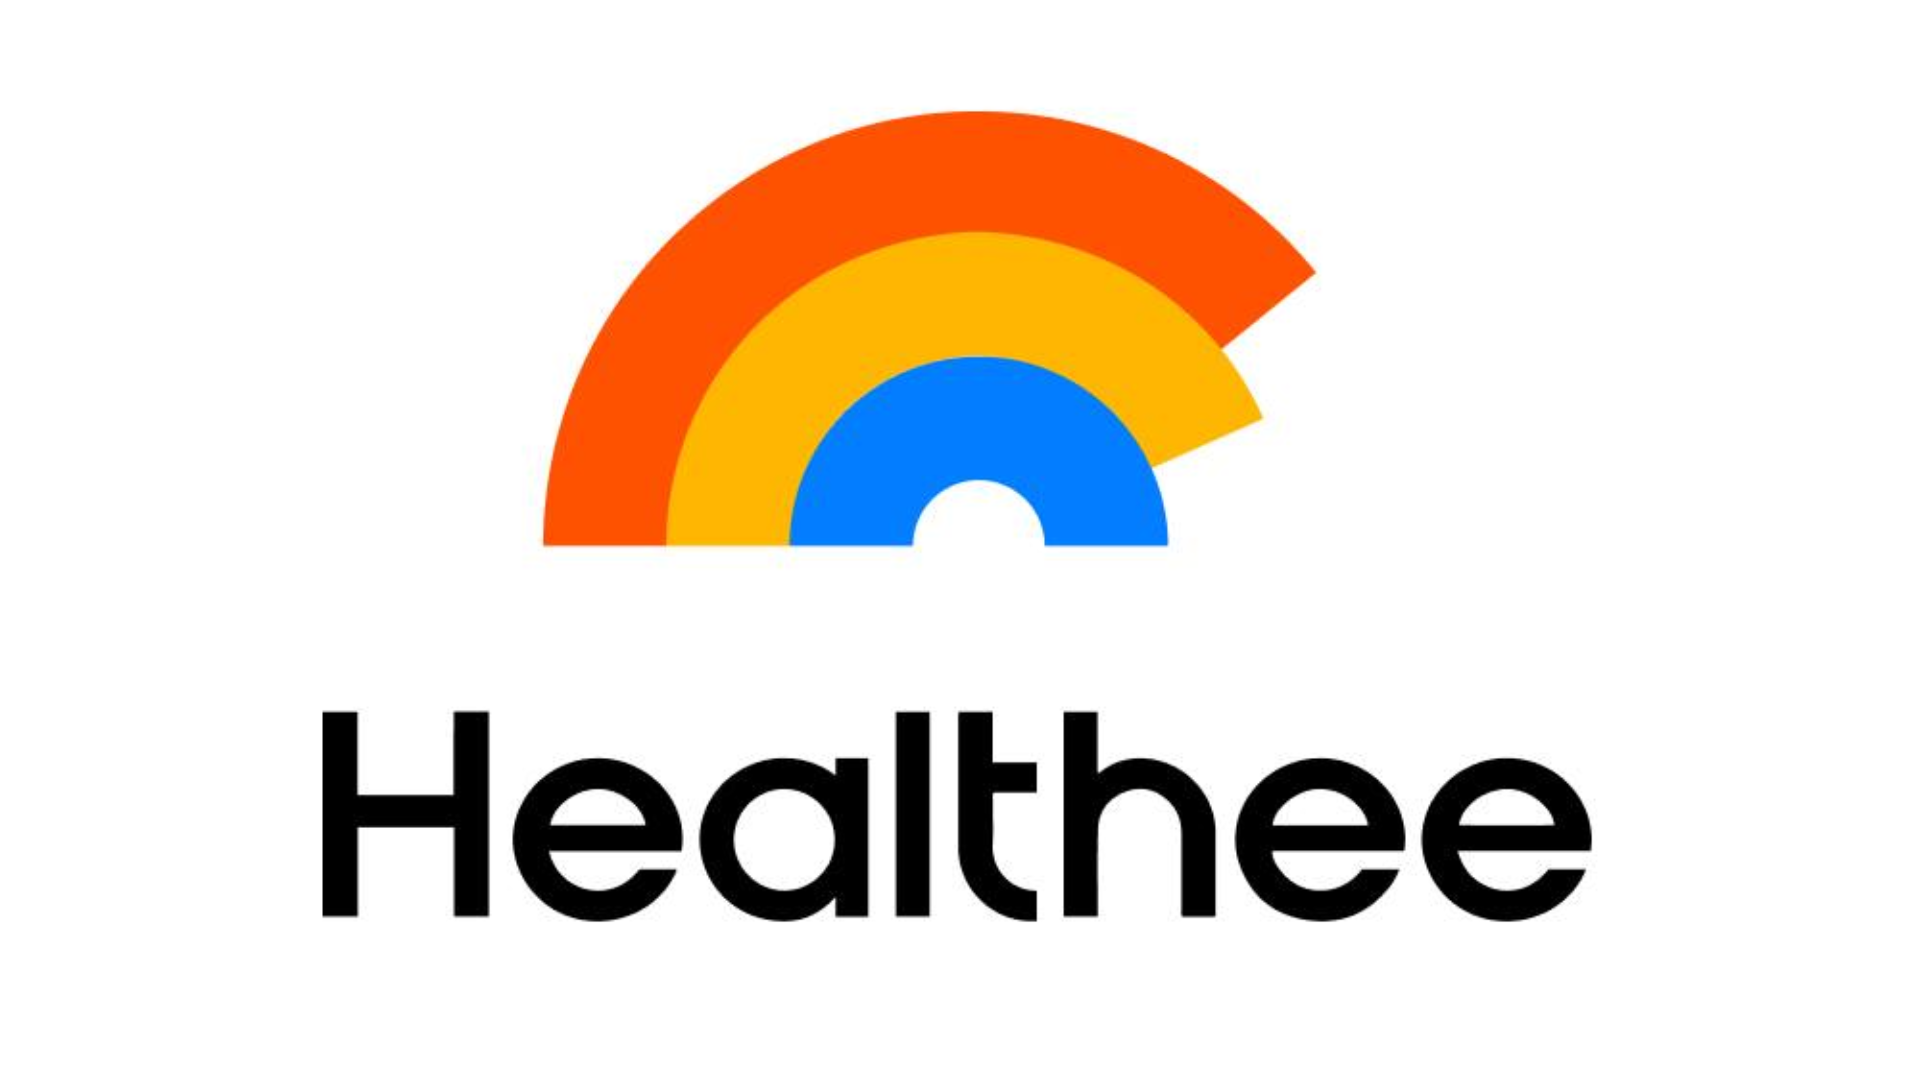 Healthee Pioneers a Path to Better Health